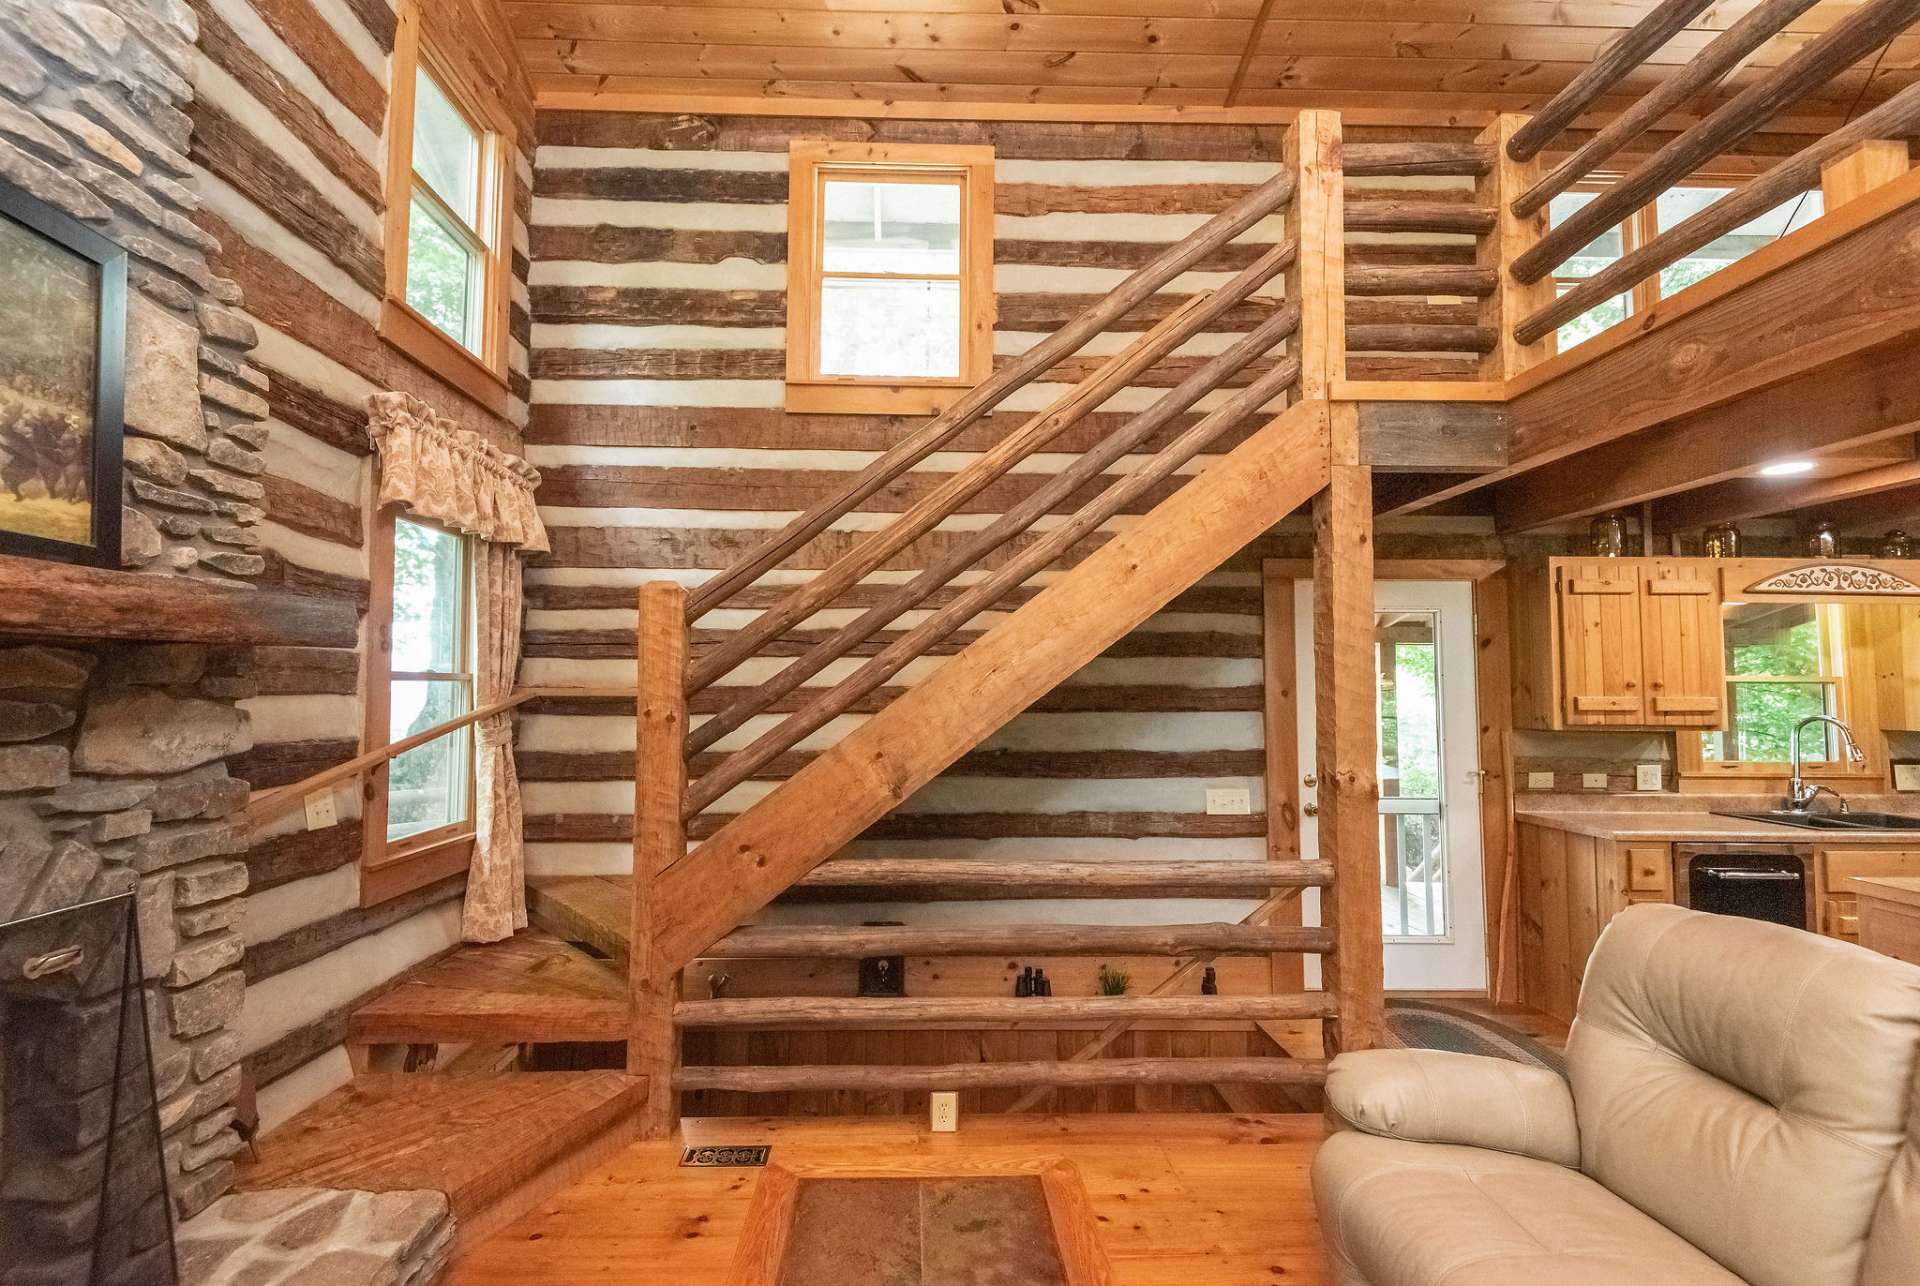 Custom hand hewn staircase leads to the spacious loft area.